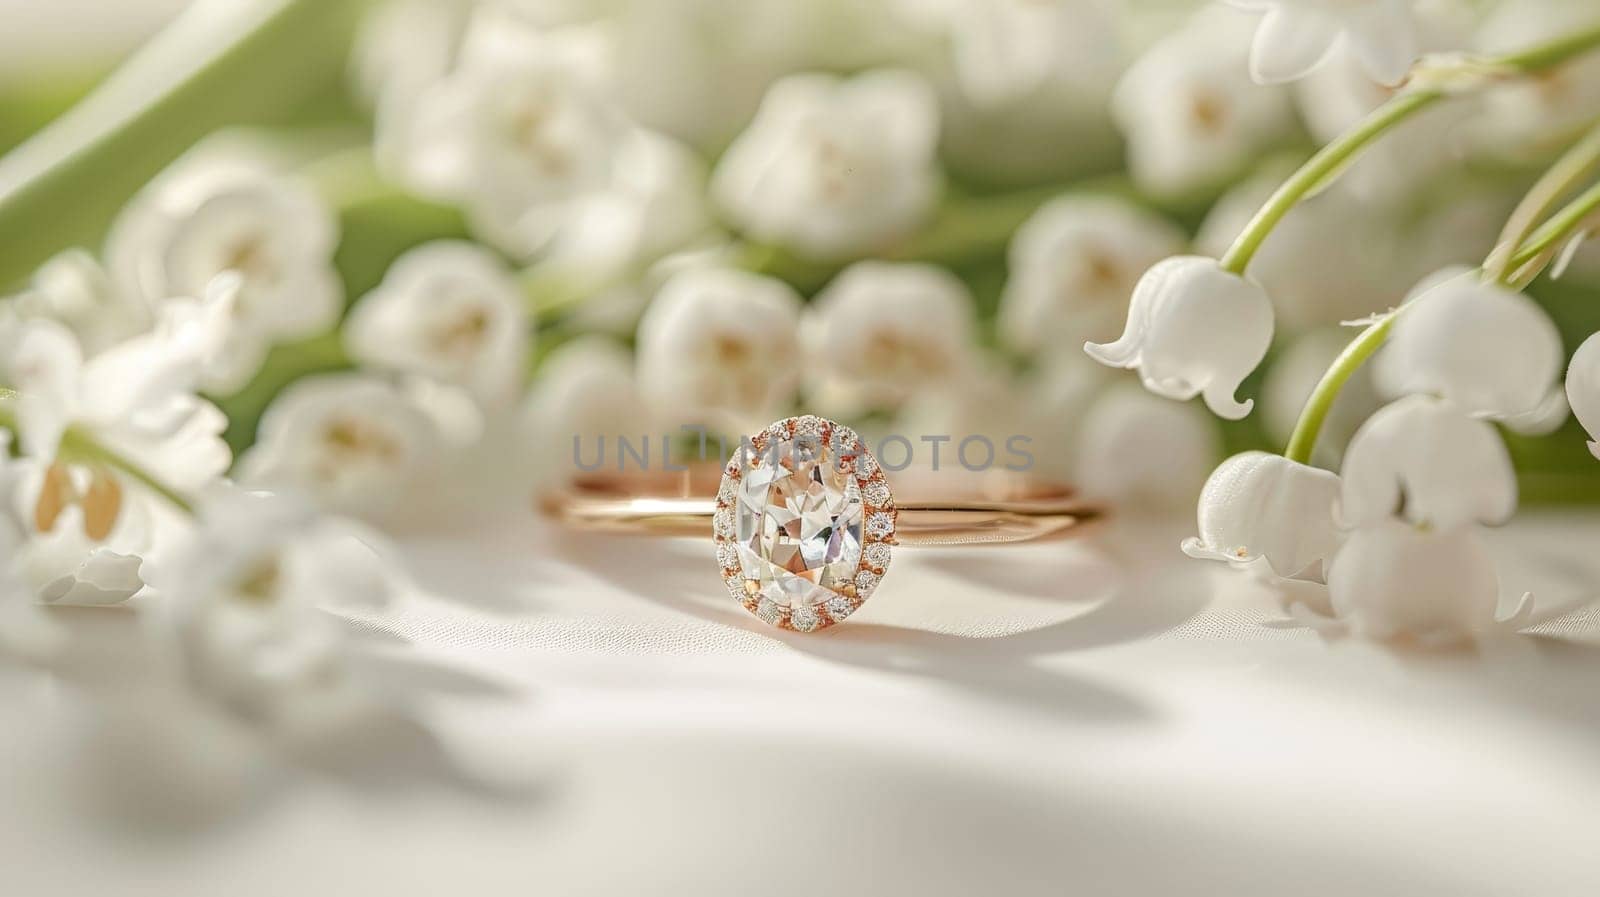 A ring with a white stone and gold band is set on a table with flowers. The ring is a symbol of love and commitment, and the flowers add a touch of elegance and natural beauty to the scene